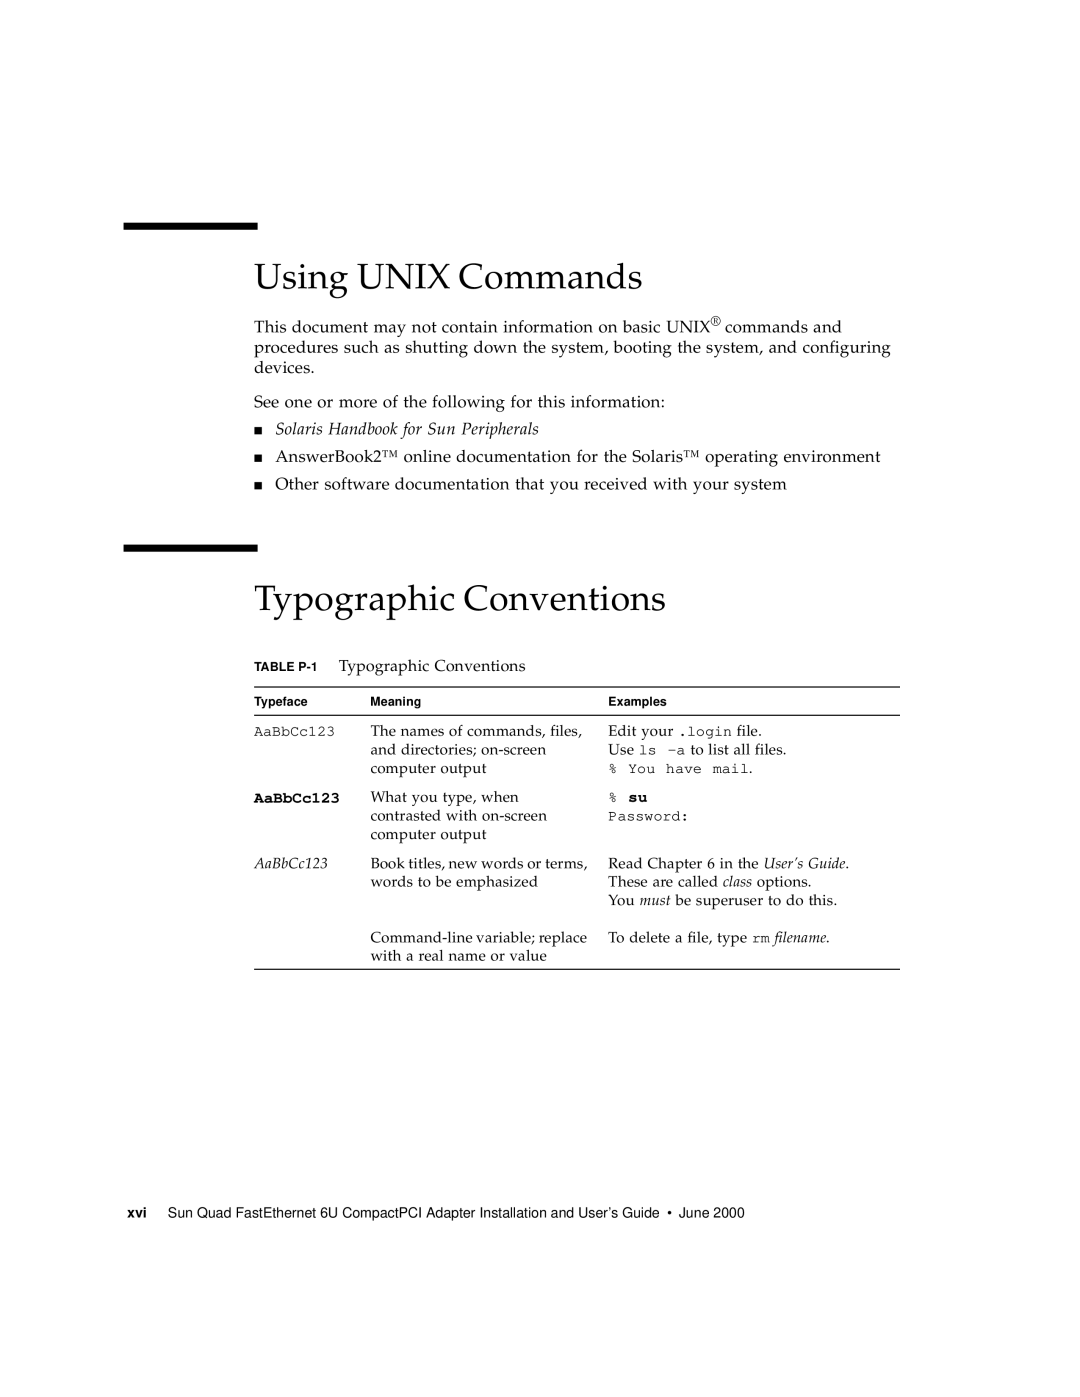 Sun Microsystems 6U manual Using UNIX Commands, Typographic Conventions 